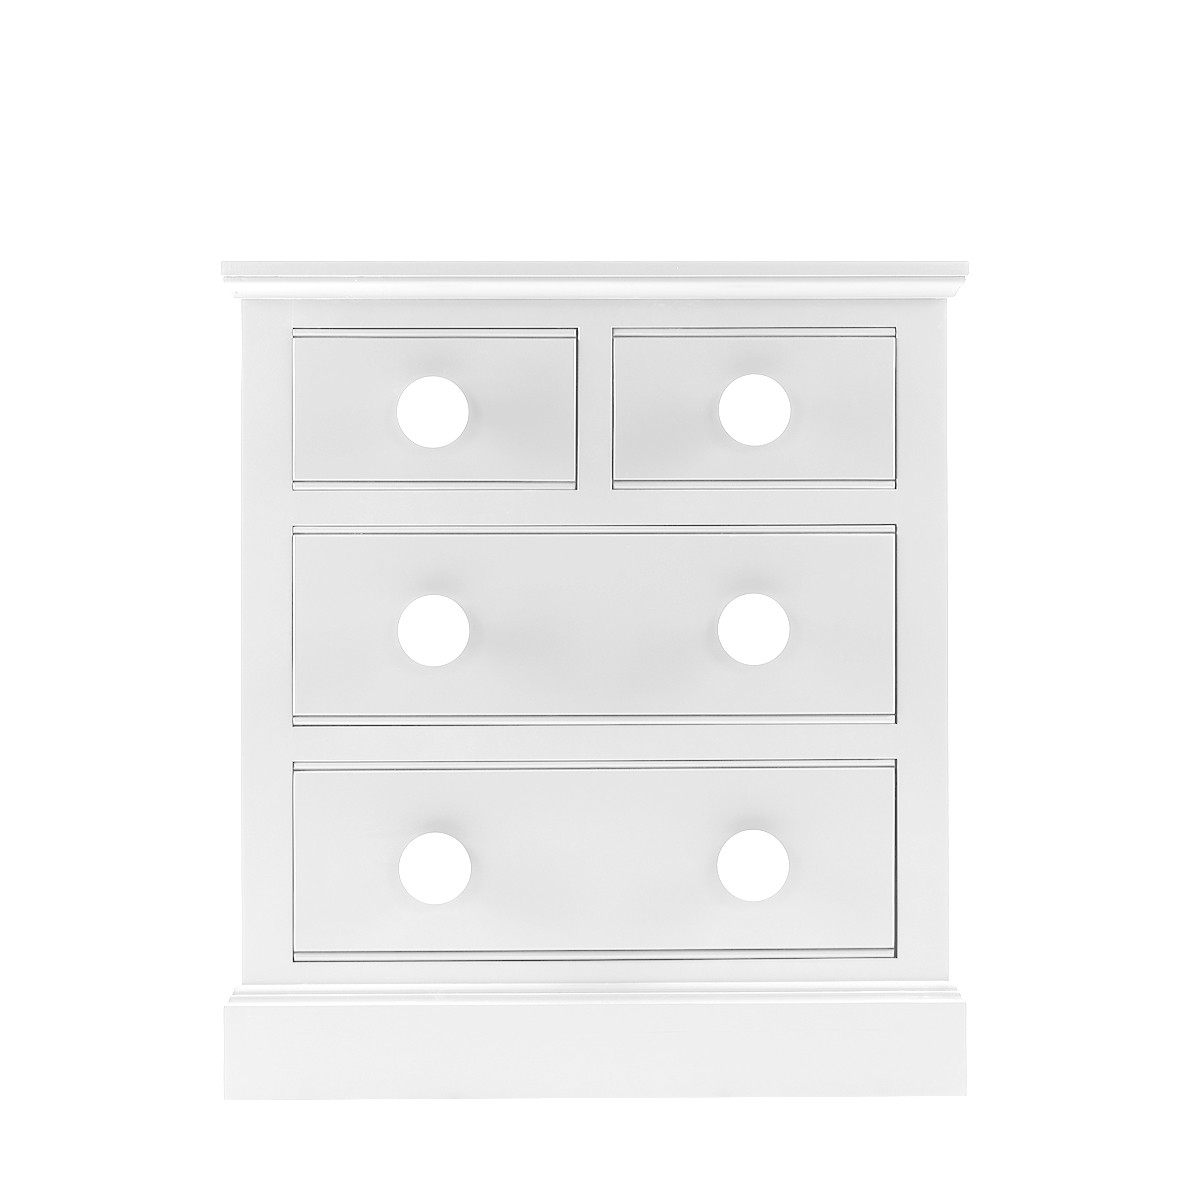 Freya & Olly Children’s Painted Furniture 2+2 Chest of Drawers Con-Tempo Furniture